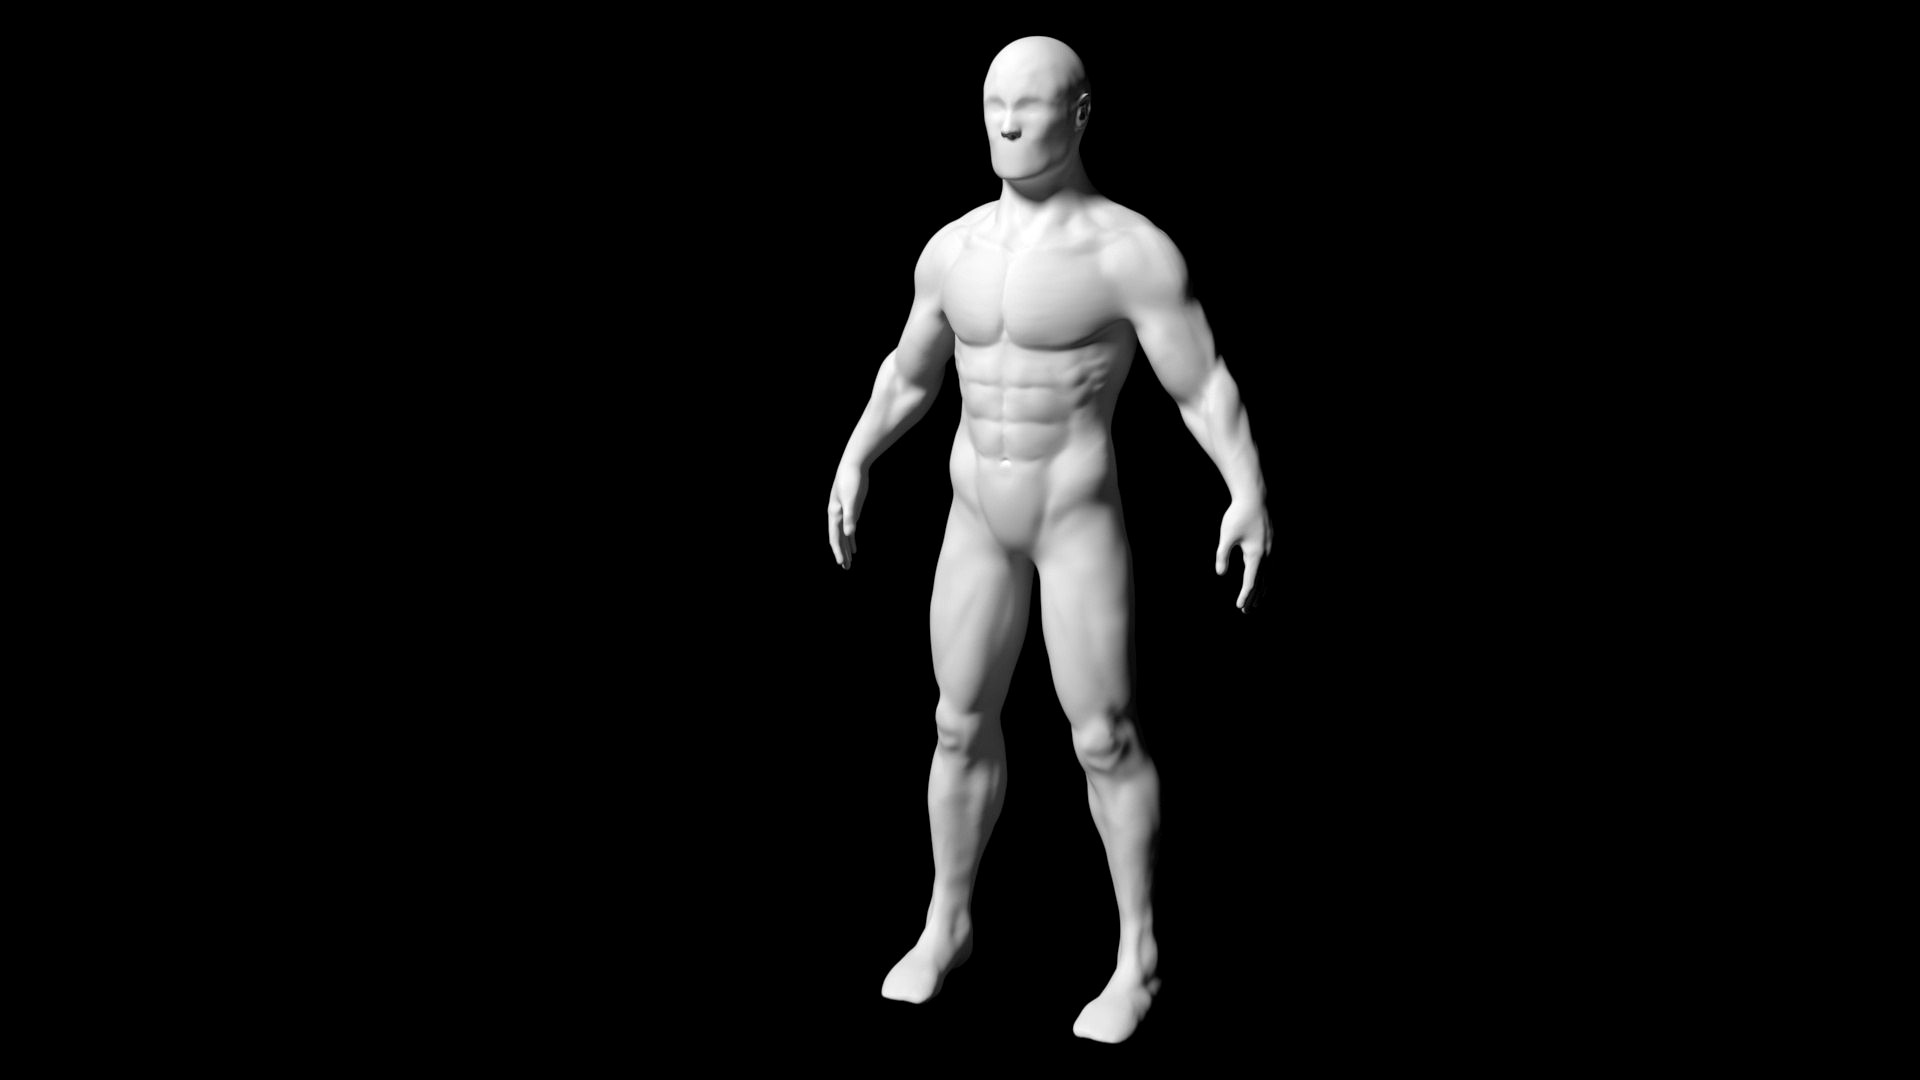 Body reference